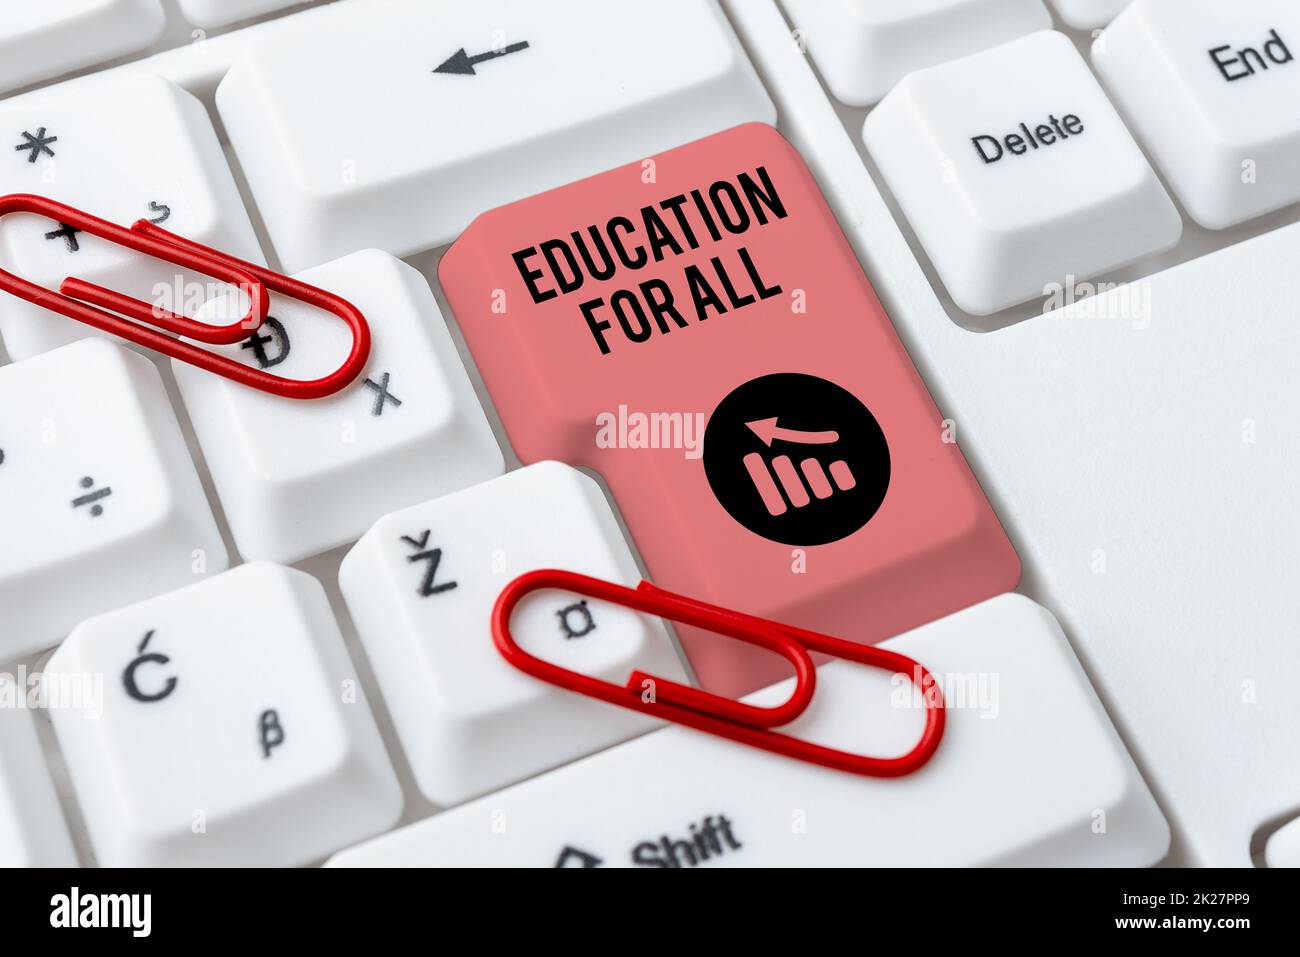 Sign displaying Education For All. Business idea Continue to Improve Your Skills and Empower your Boundaries Abstract Typing Presentation Message, Retyping New Email Password Stock Photo